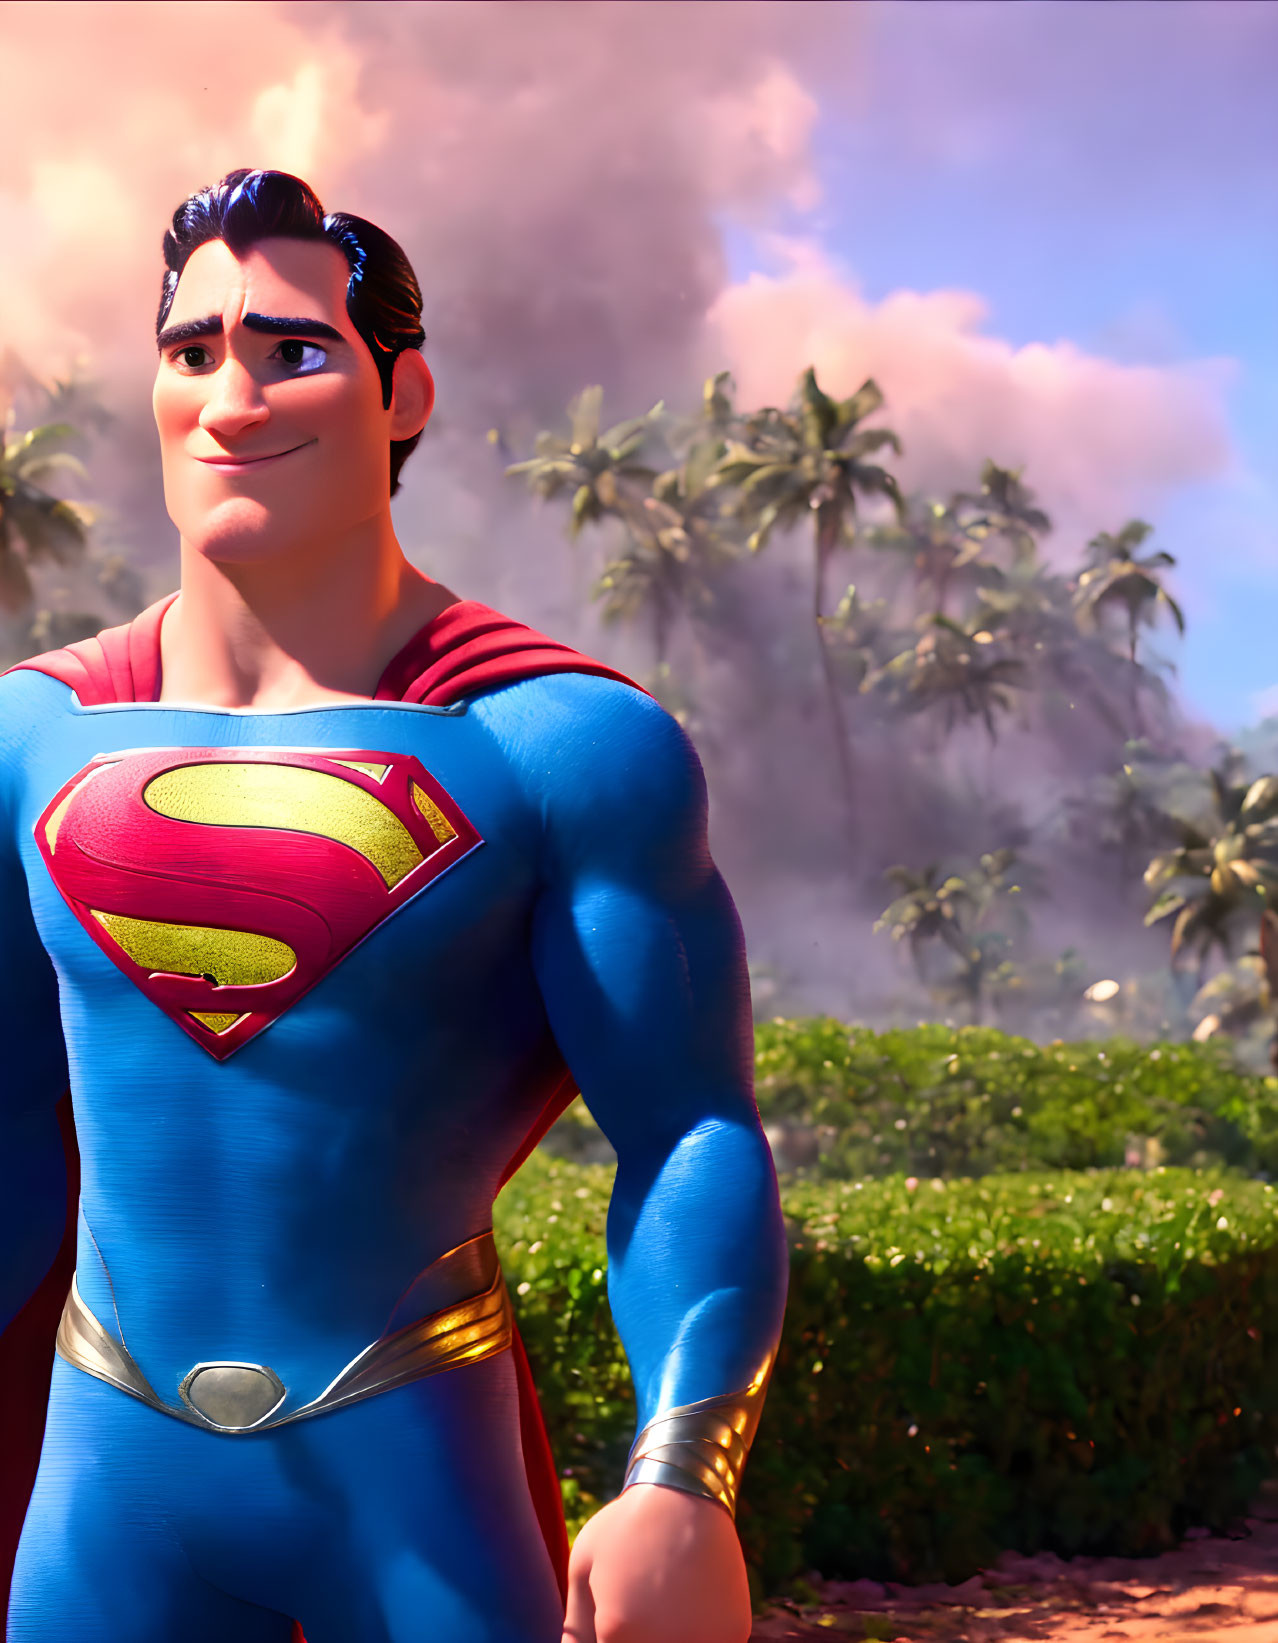 Superman animated character in heroic pose against tropical backdrop